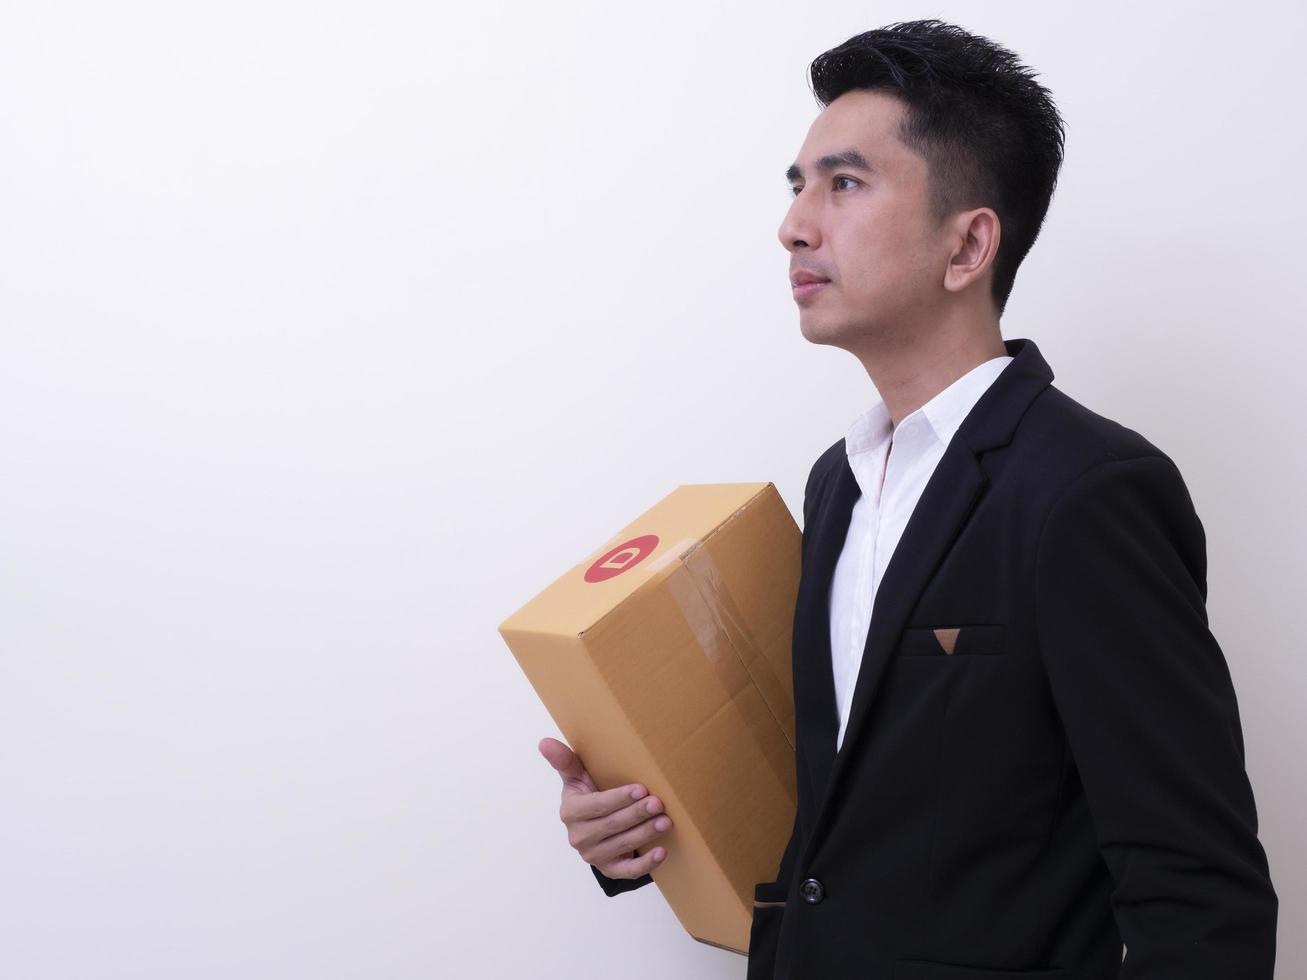 Shop assistant brings the parcel, isolated, white background photo